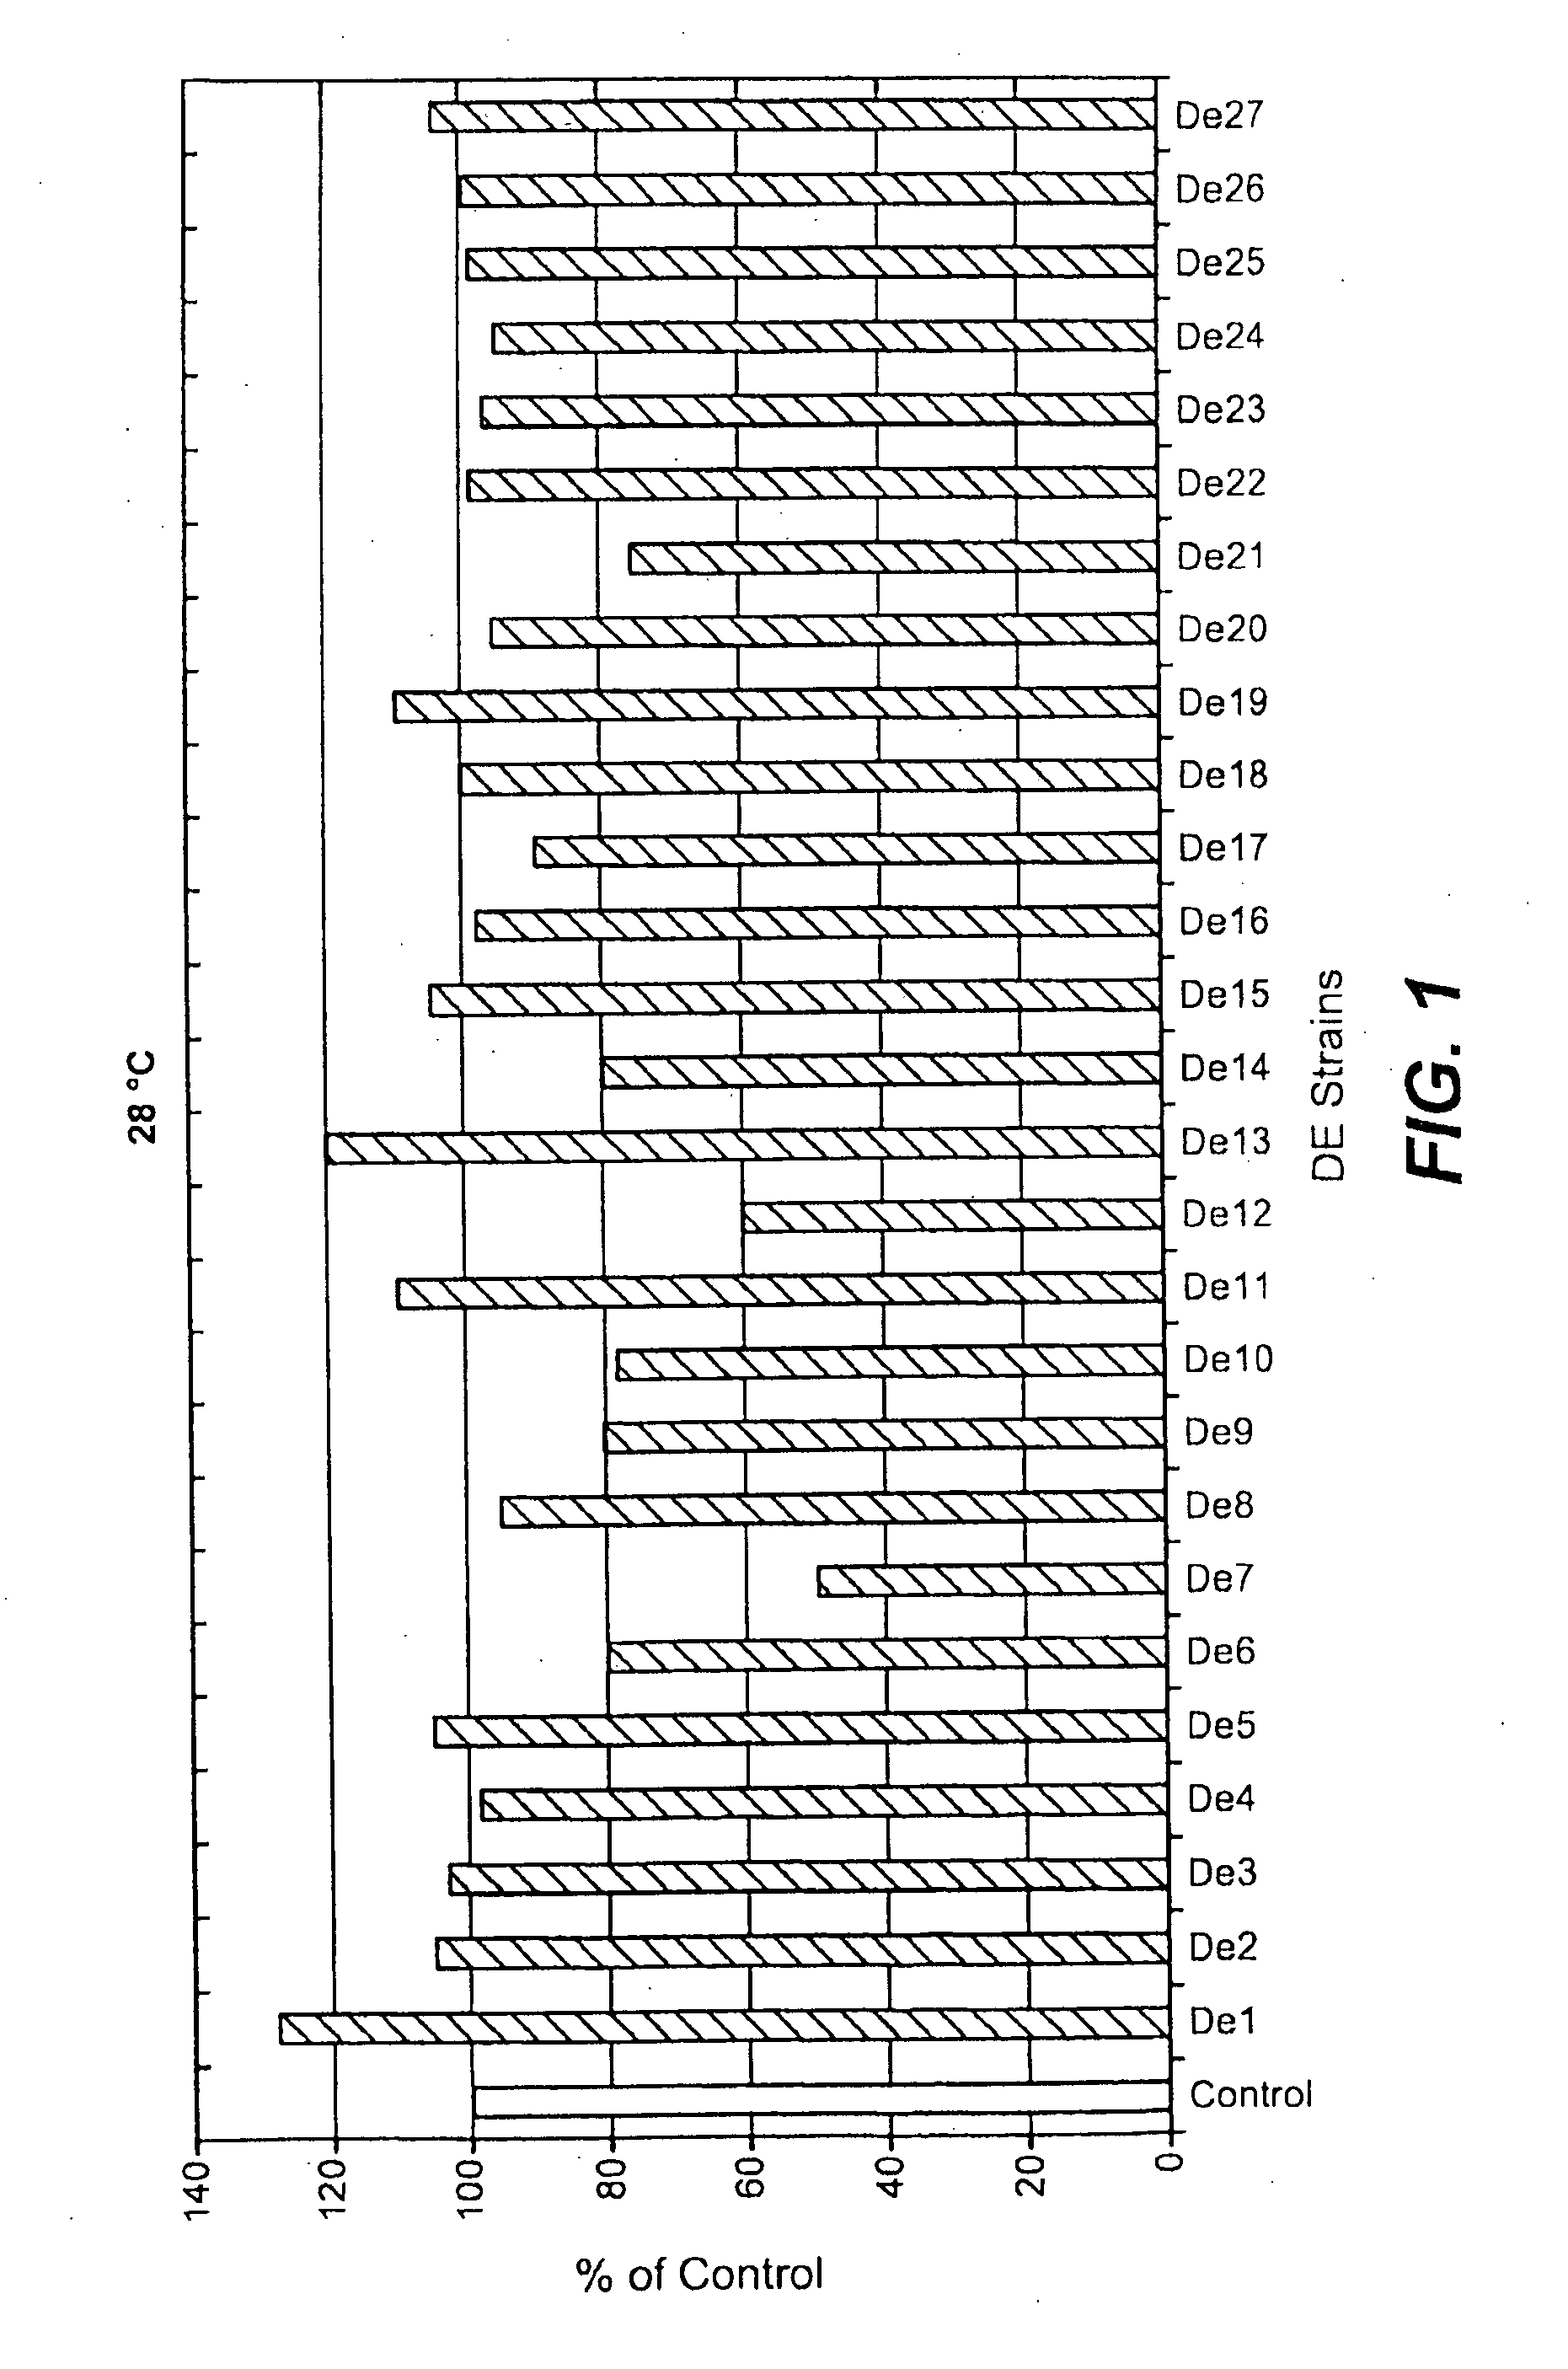 Methods for Selecting Improved Strains